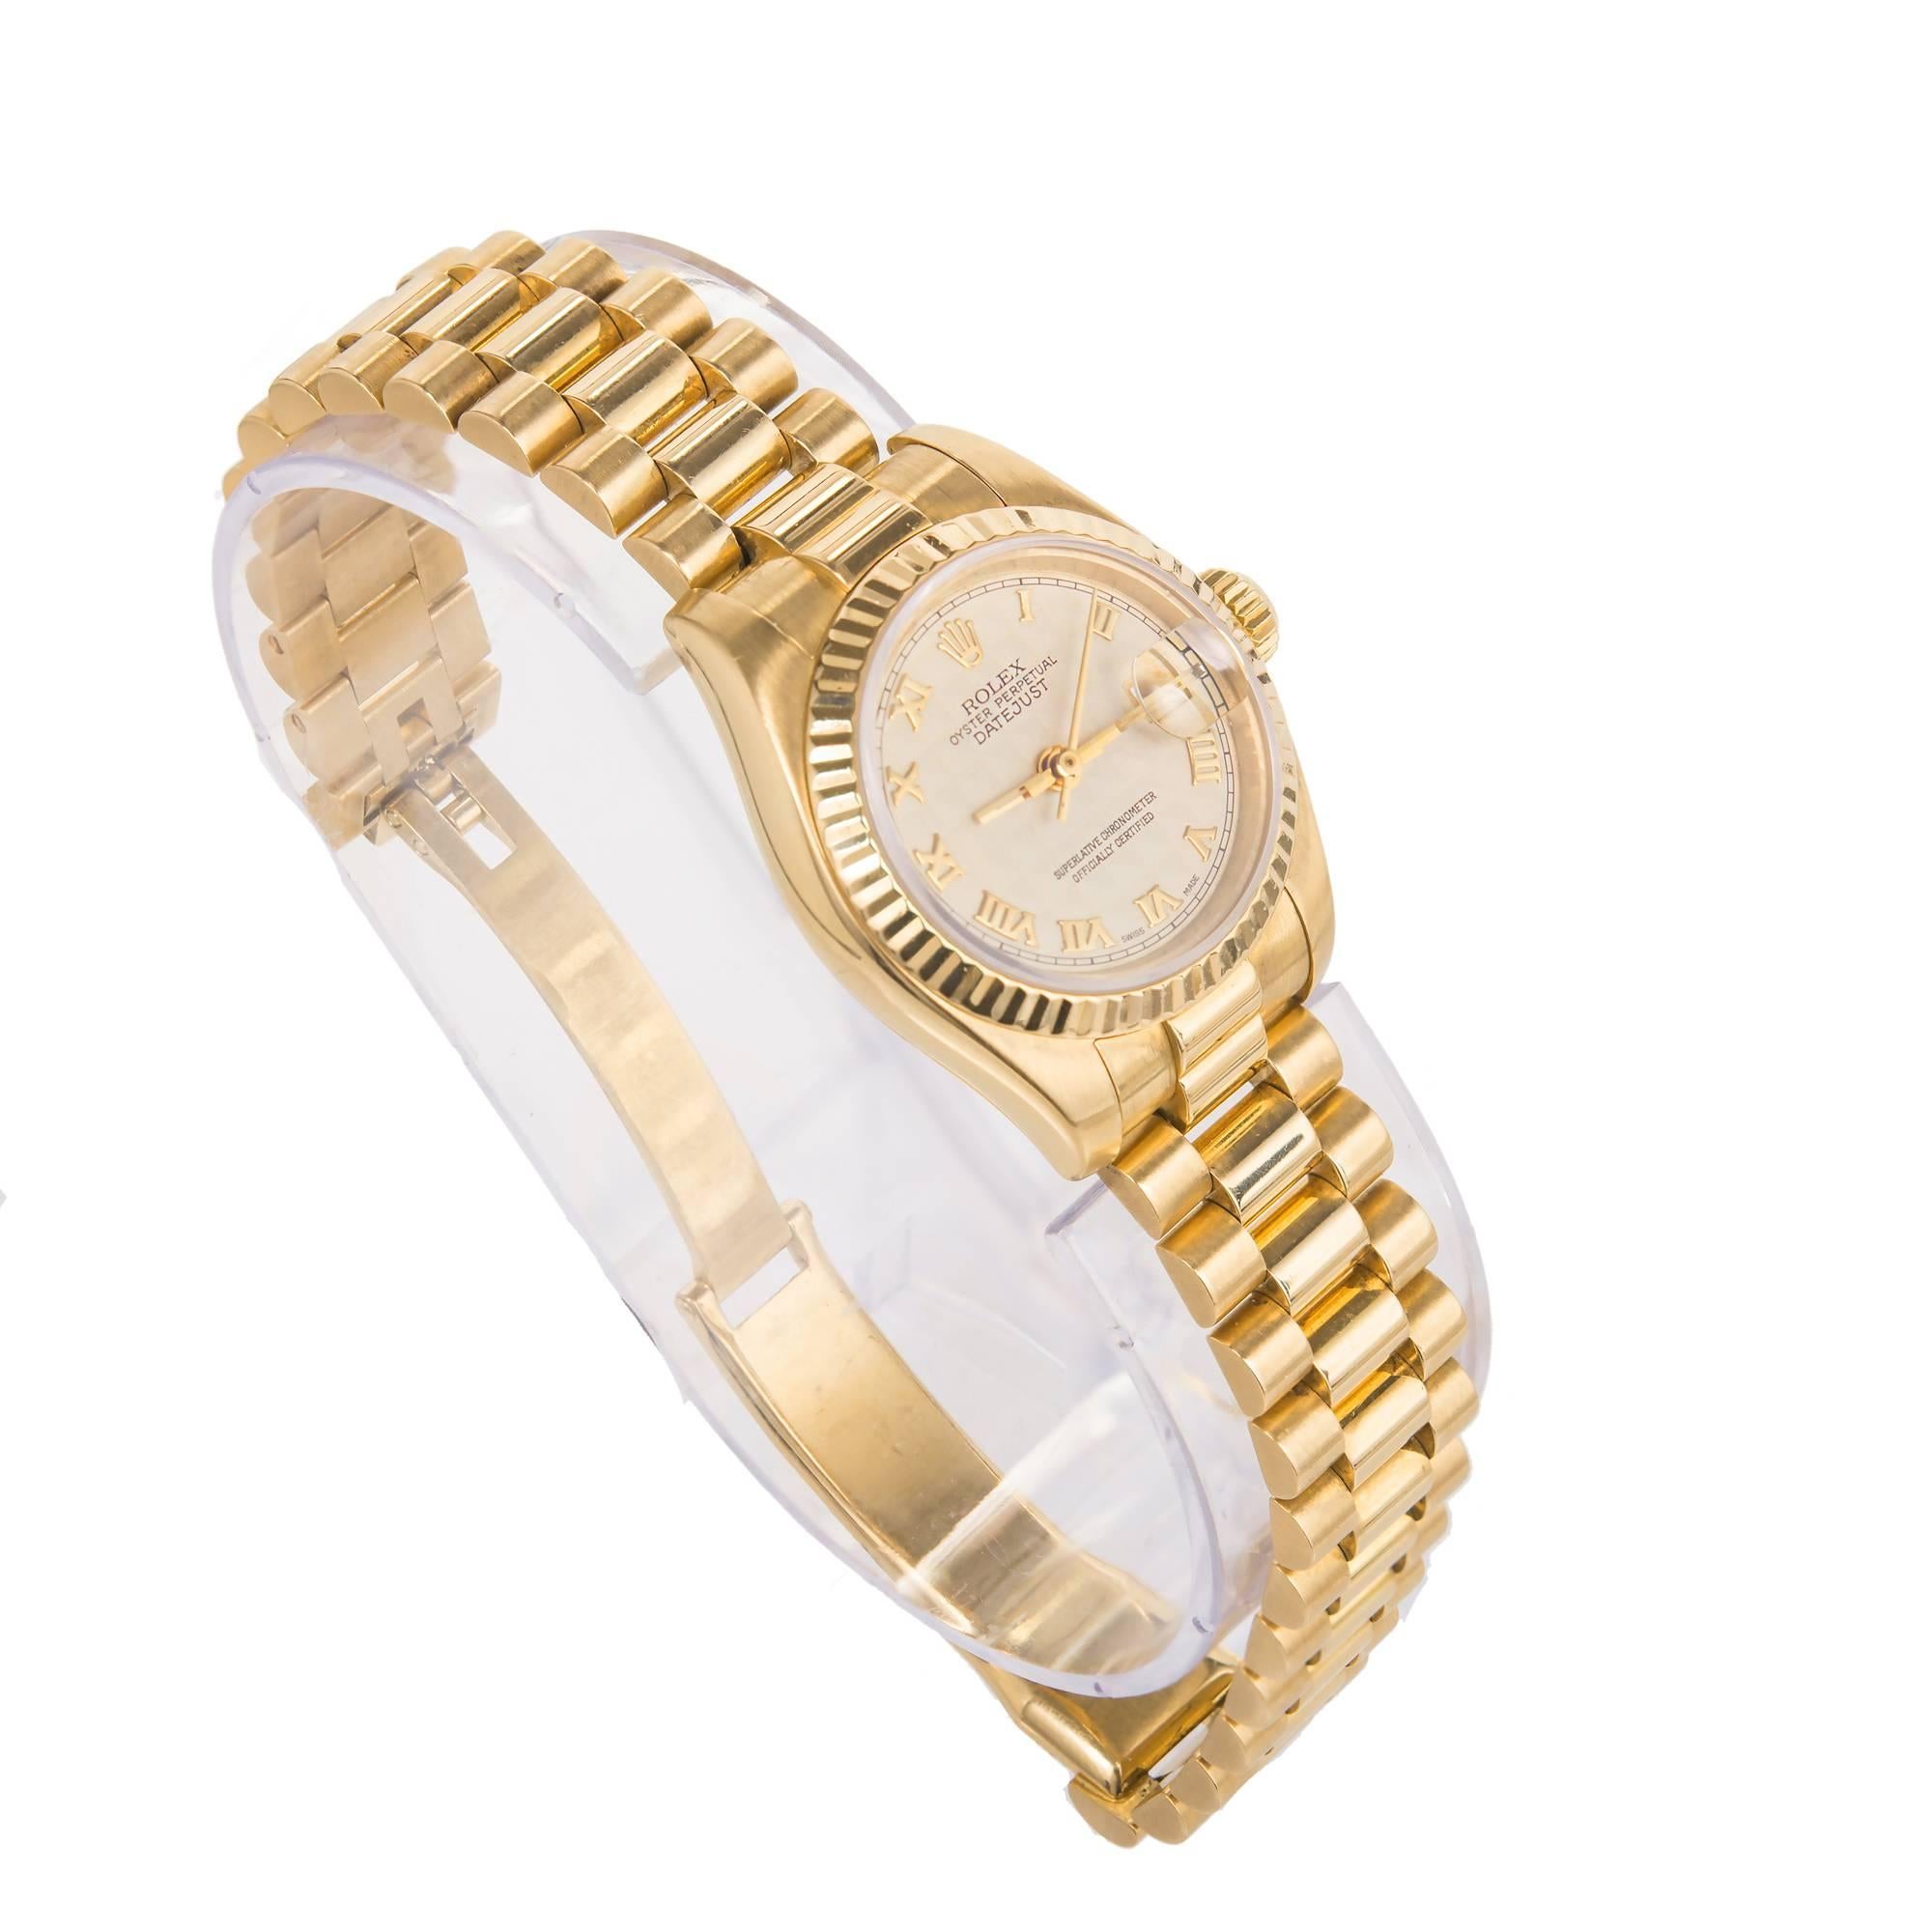 Rolex lady's 18k yellow gold Datejust wristwatch, Ref. 179178, circa 2002, cream-colored textured dial with gold Roman numerals. The dial has a pattern on it that is hard to photograph. the close up photo captures it accurately. 

18k yellow gold